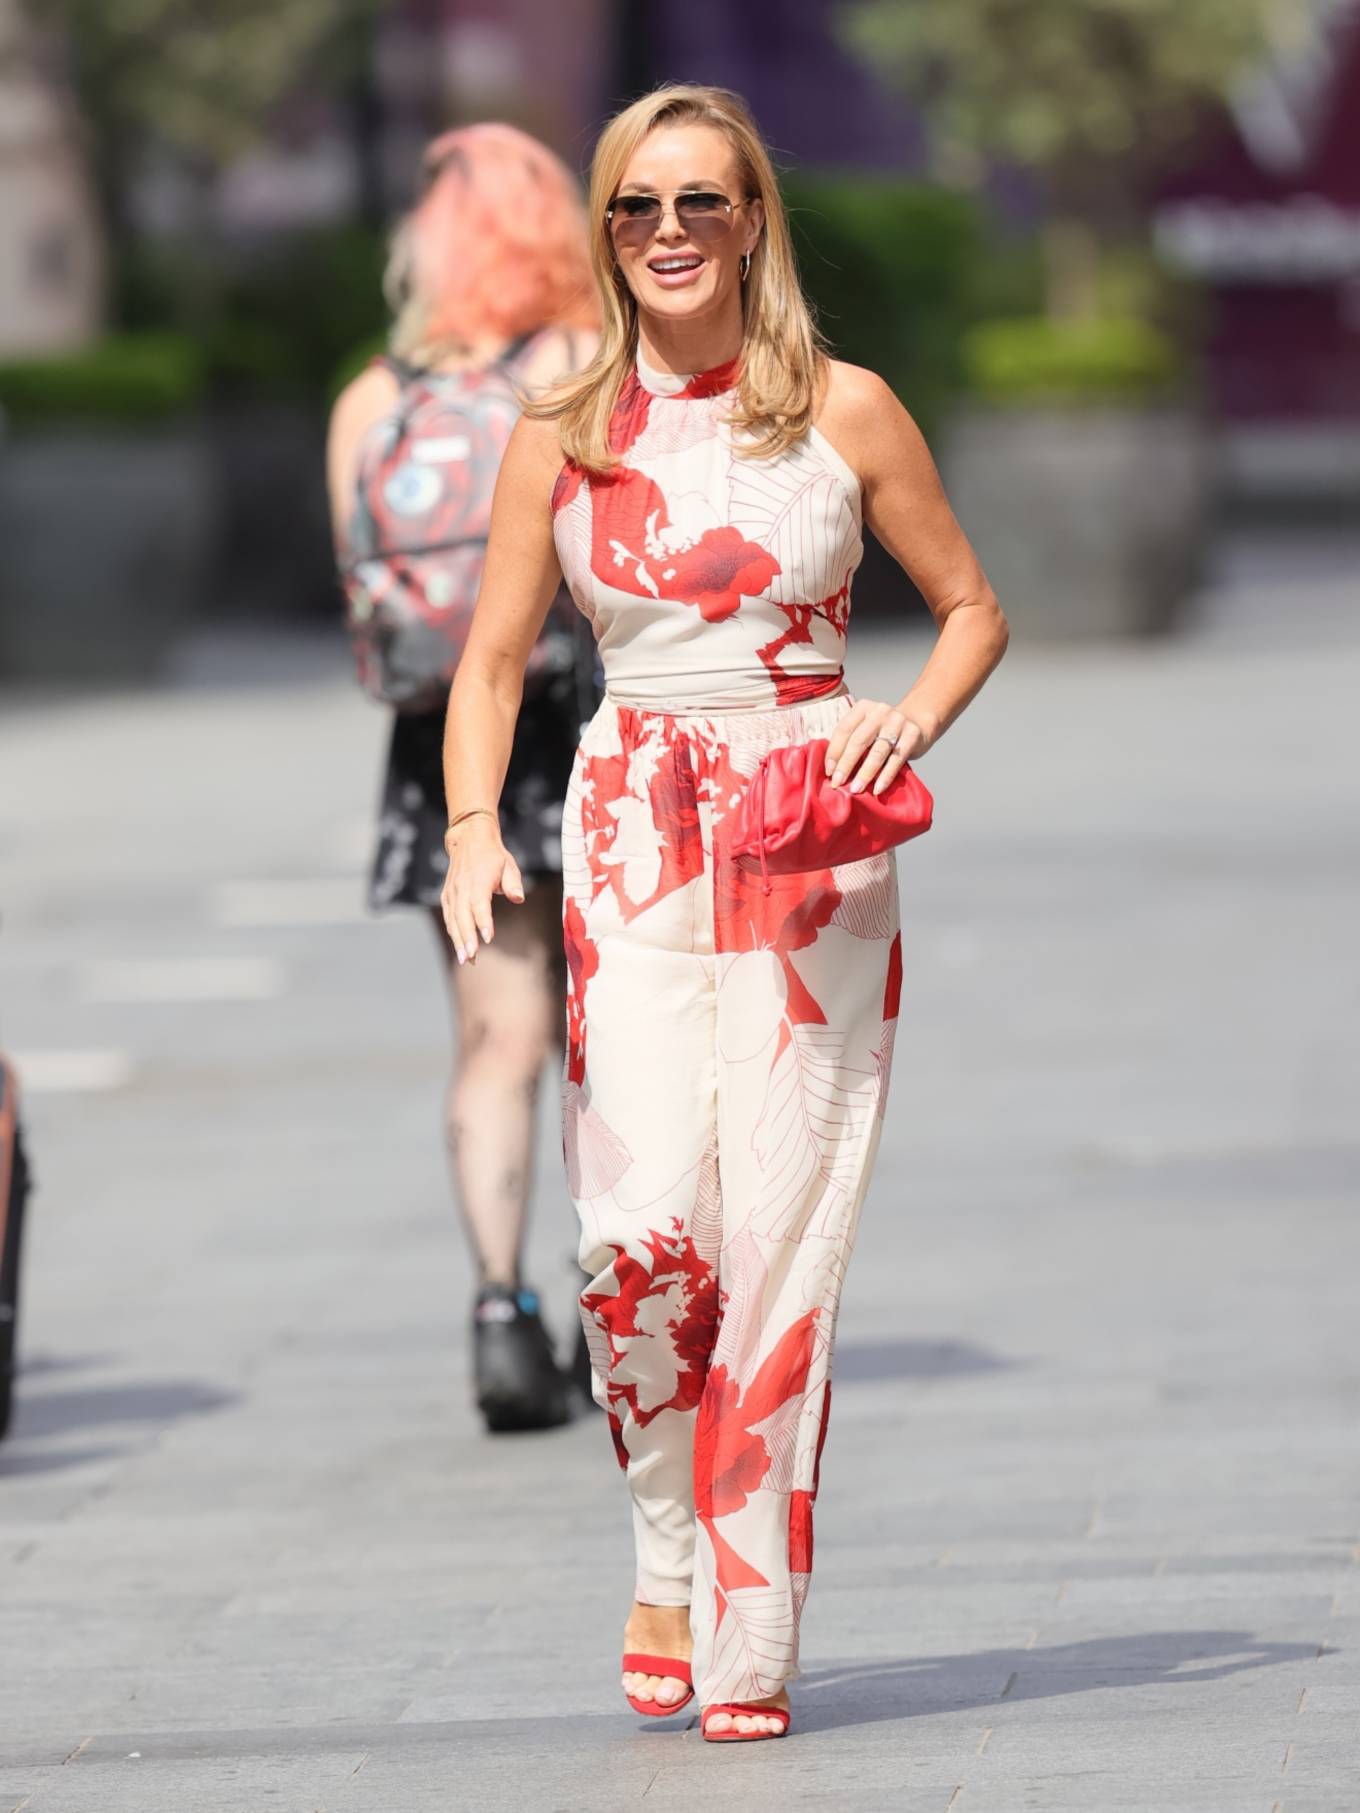 Amanda Holden 2021 : Amanda Holden – In a red and white jumpsuit at Heart radio in London-16